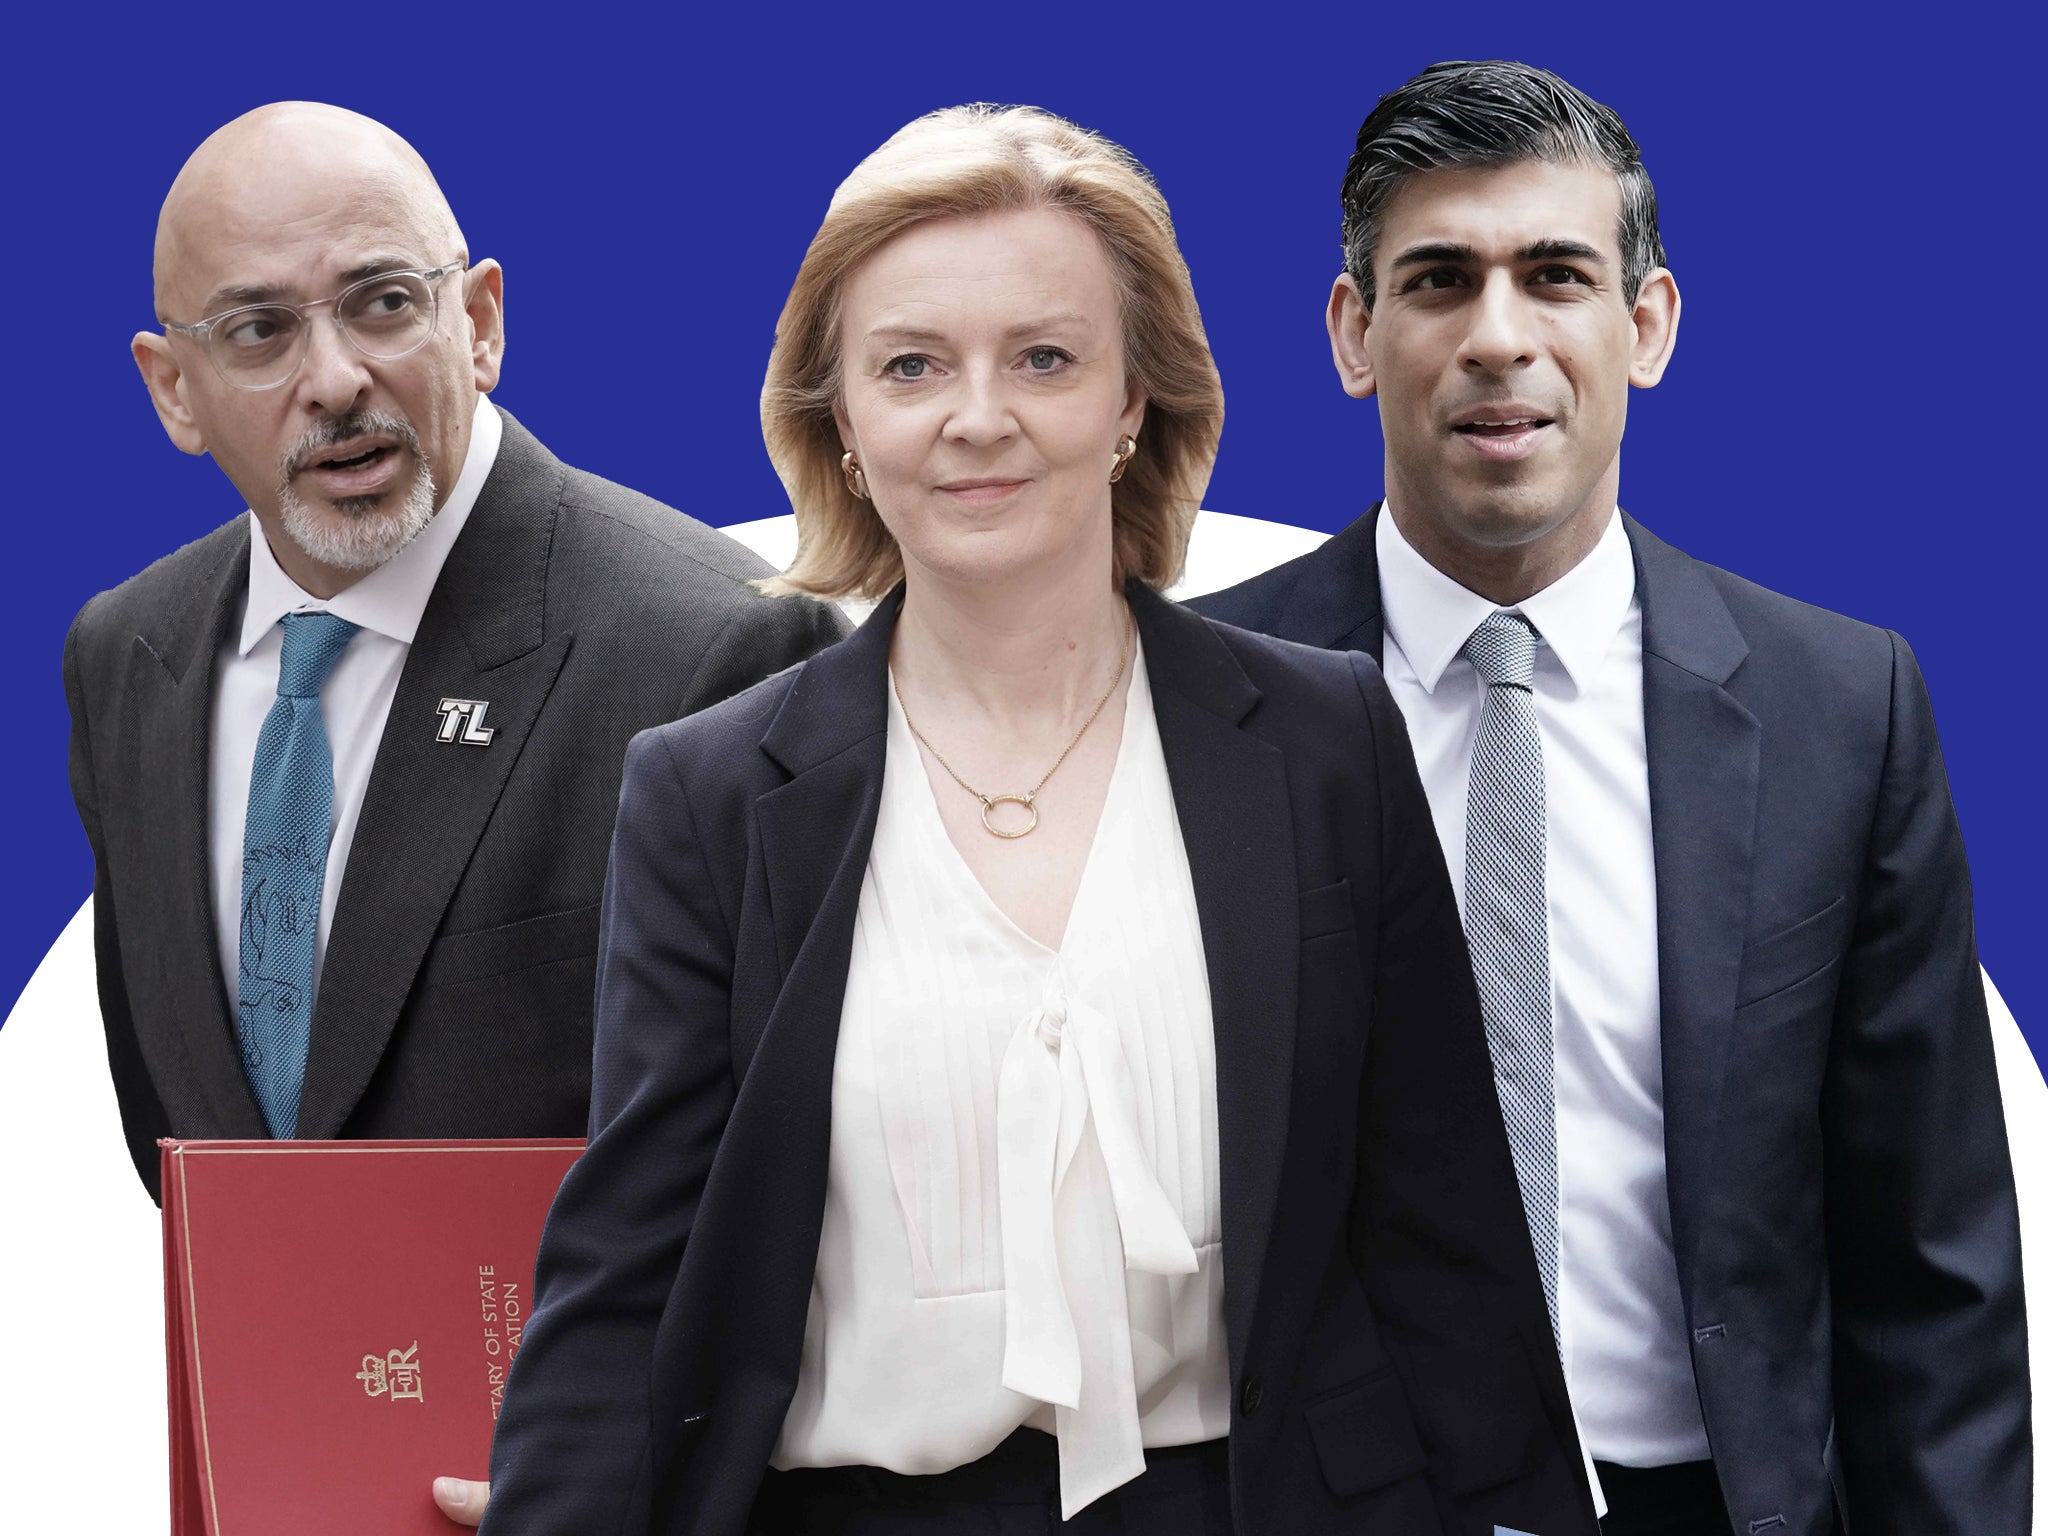 Nadhim Zahawi, and Rishi Sunak have entered the race to become the next Tory leader, while Liz Truss is expected to formally enter this week